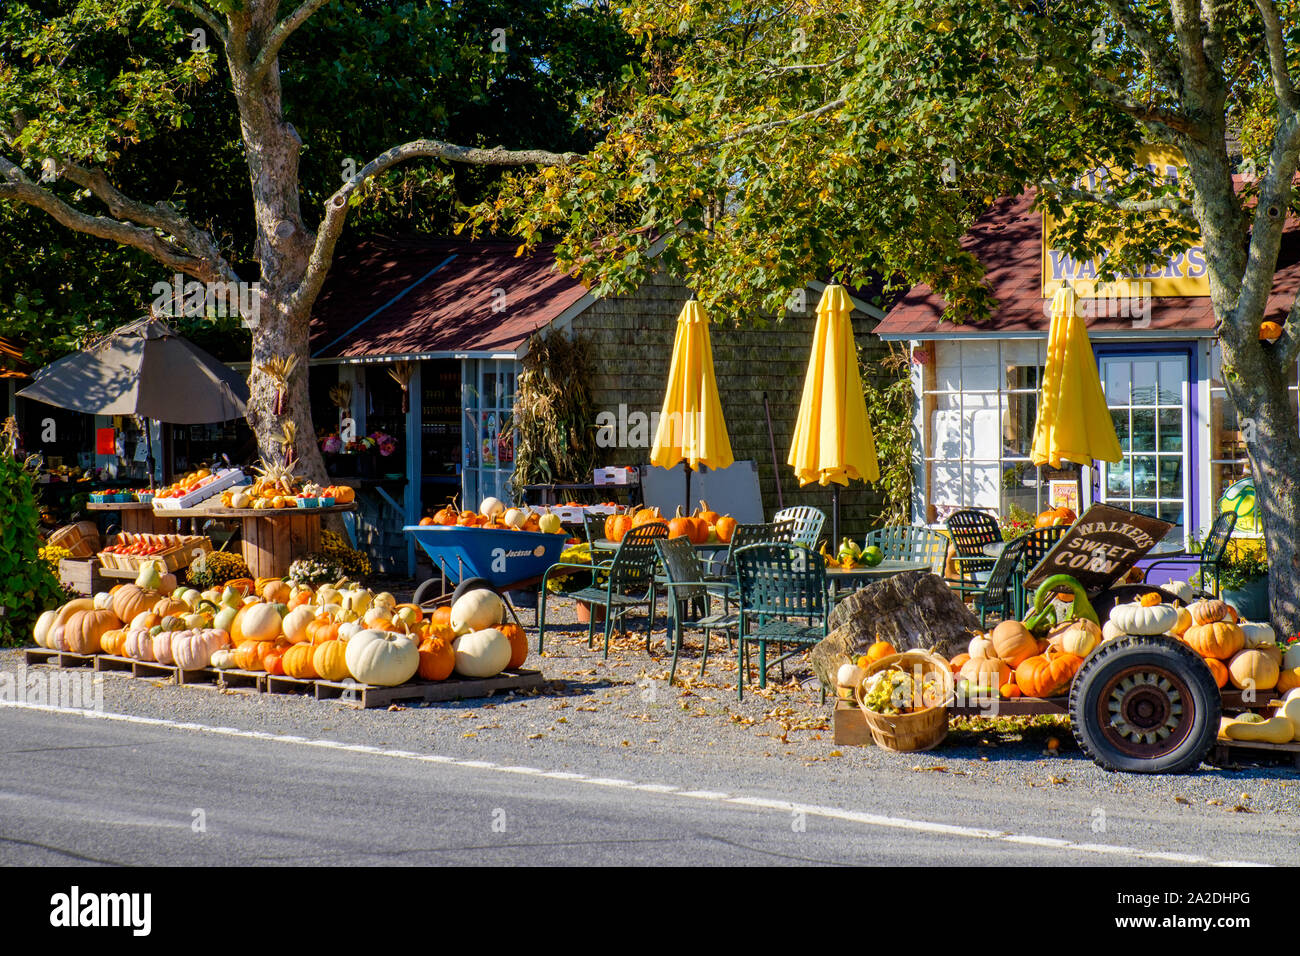 Pumpkins and other produce displayed at Walkers Roadside Stand at 261 W Main Rd 02837 Little Compton, Rhode Island, USA Stock Photo